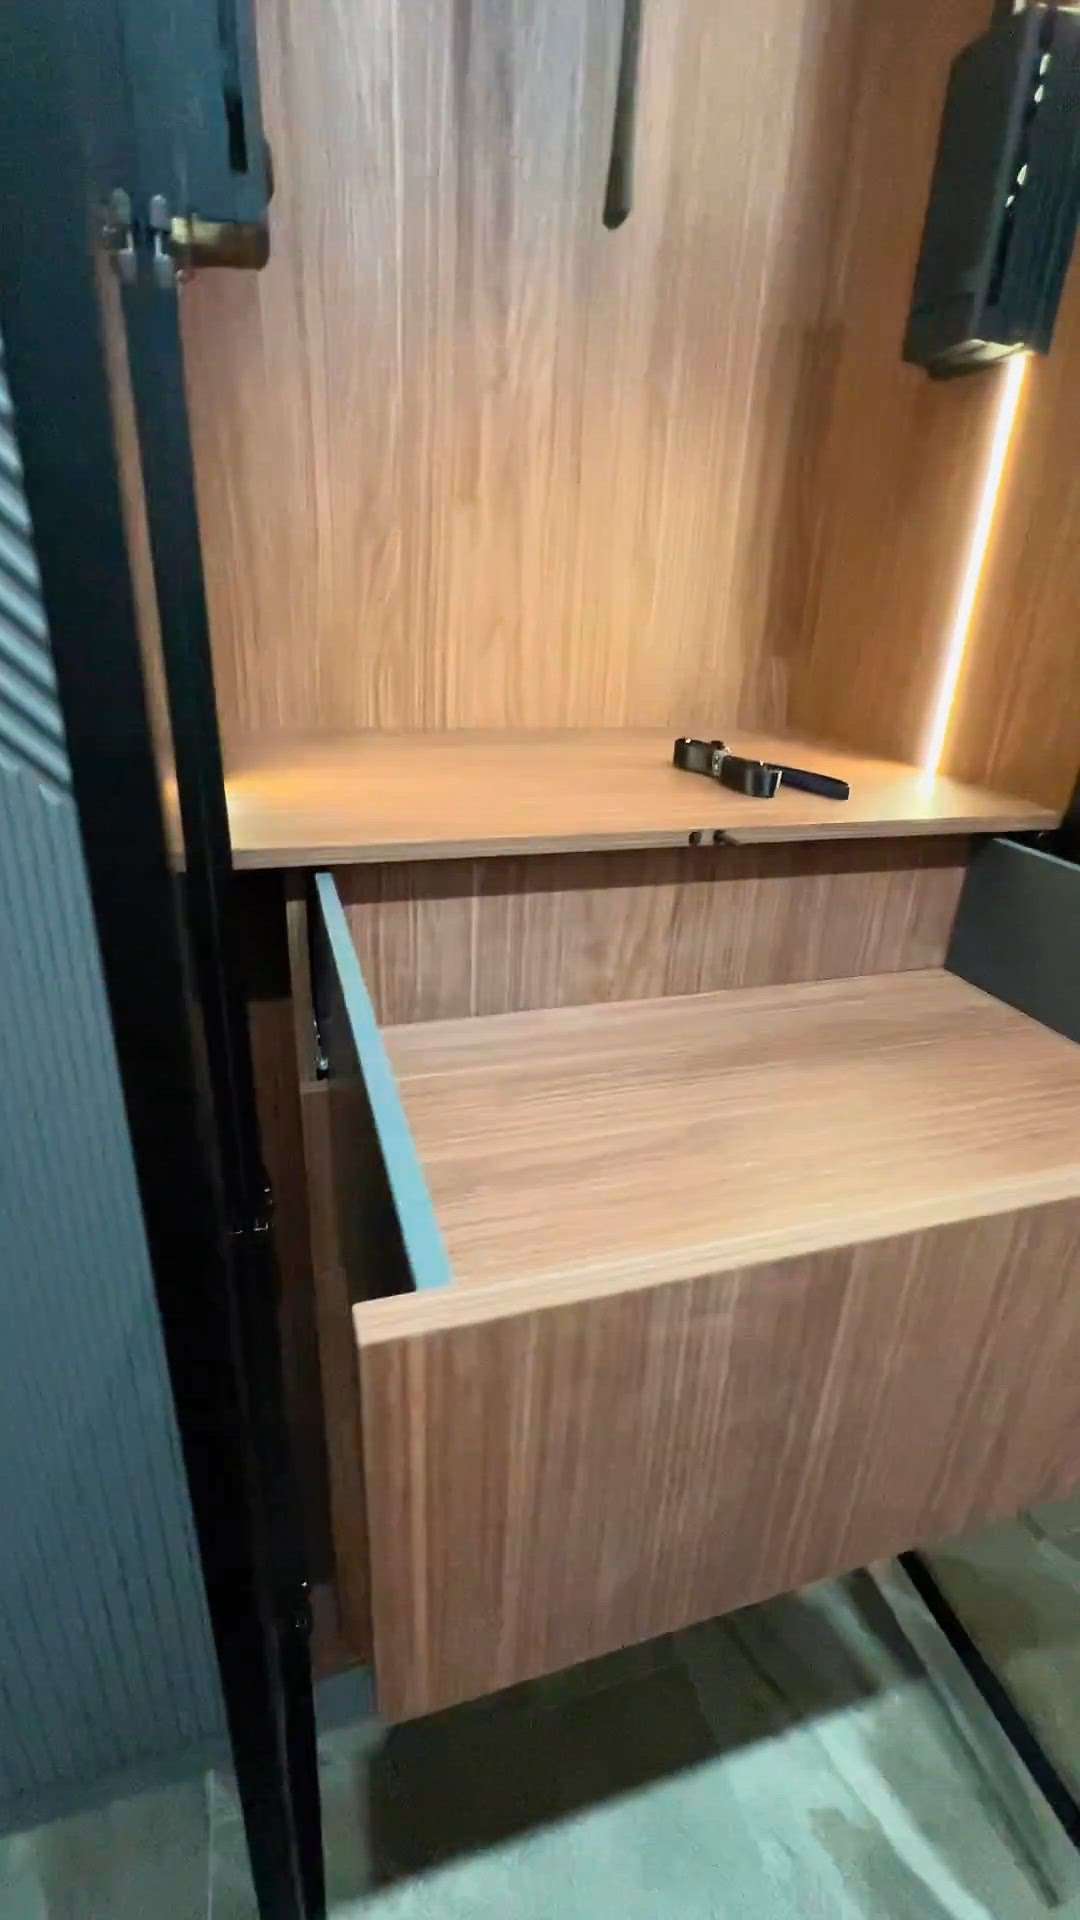 Walk in Wardrobe Dare to make this happen in your house.. Luxurious Design ✨

✨ Contact - 8319099875
#HouseConstruction #constructionsite #constructioncompany #HouseRenovation #KitchenRenovation #BathroomRenovation #duplecdesign